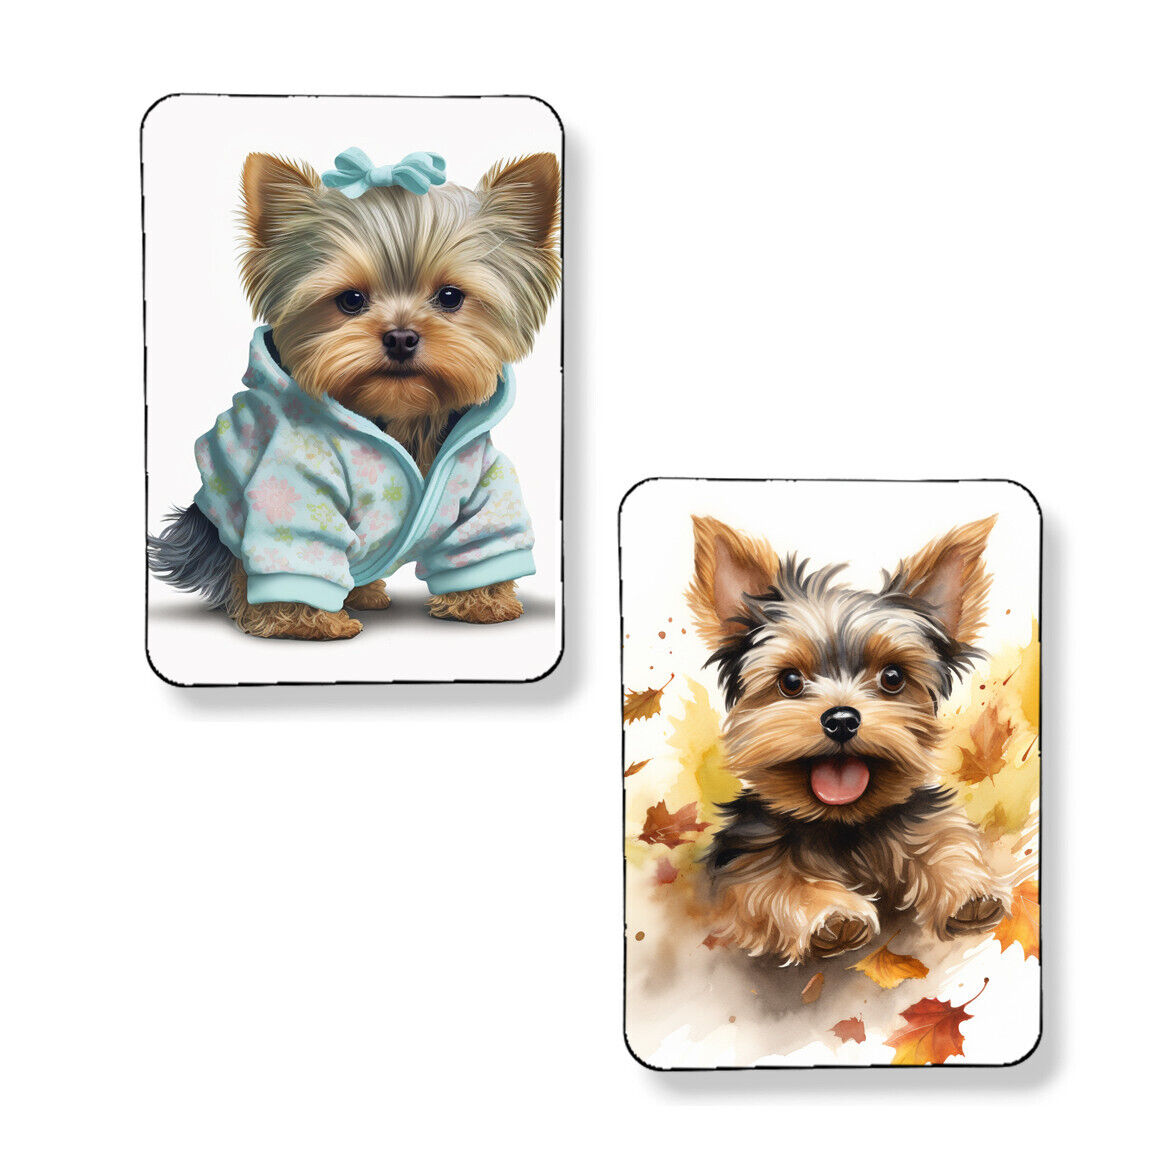 Set of 2 Yorkshire Terrier Yorkie Magnets Bedtime & Play Time Graphic Art Prints